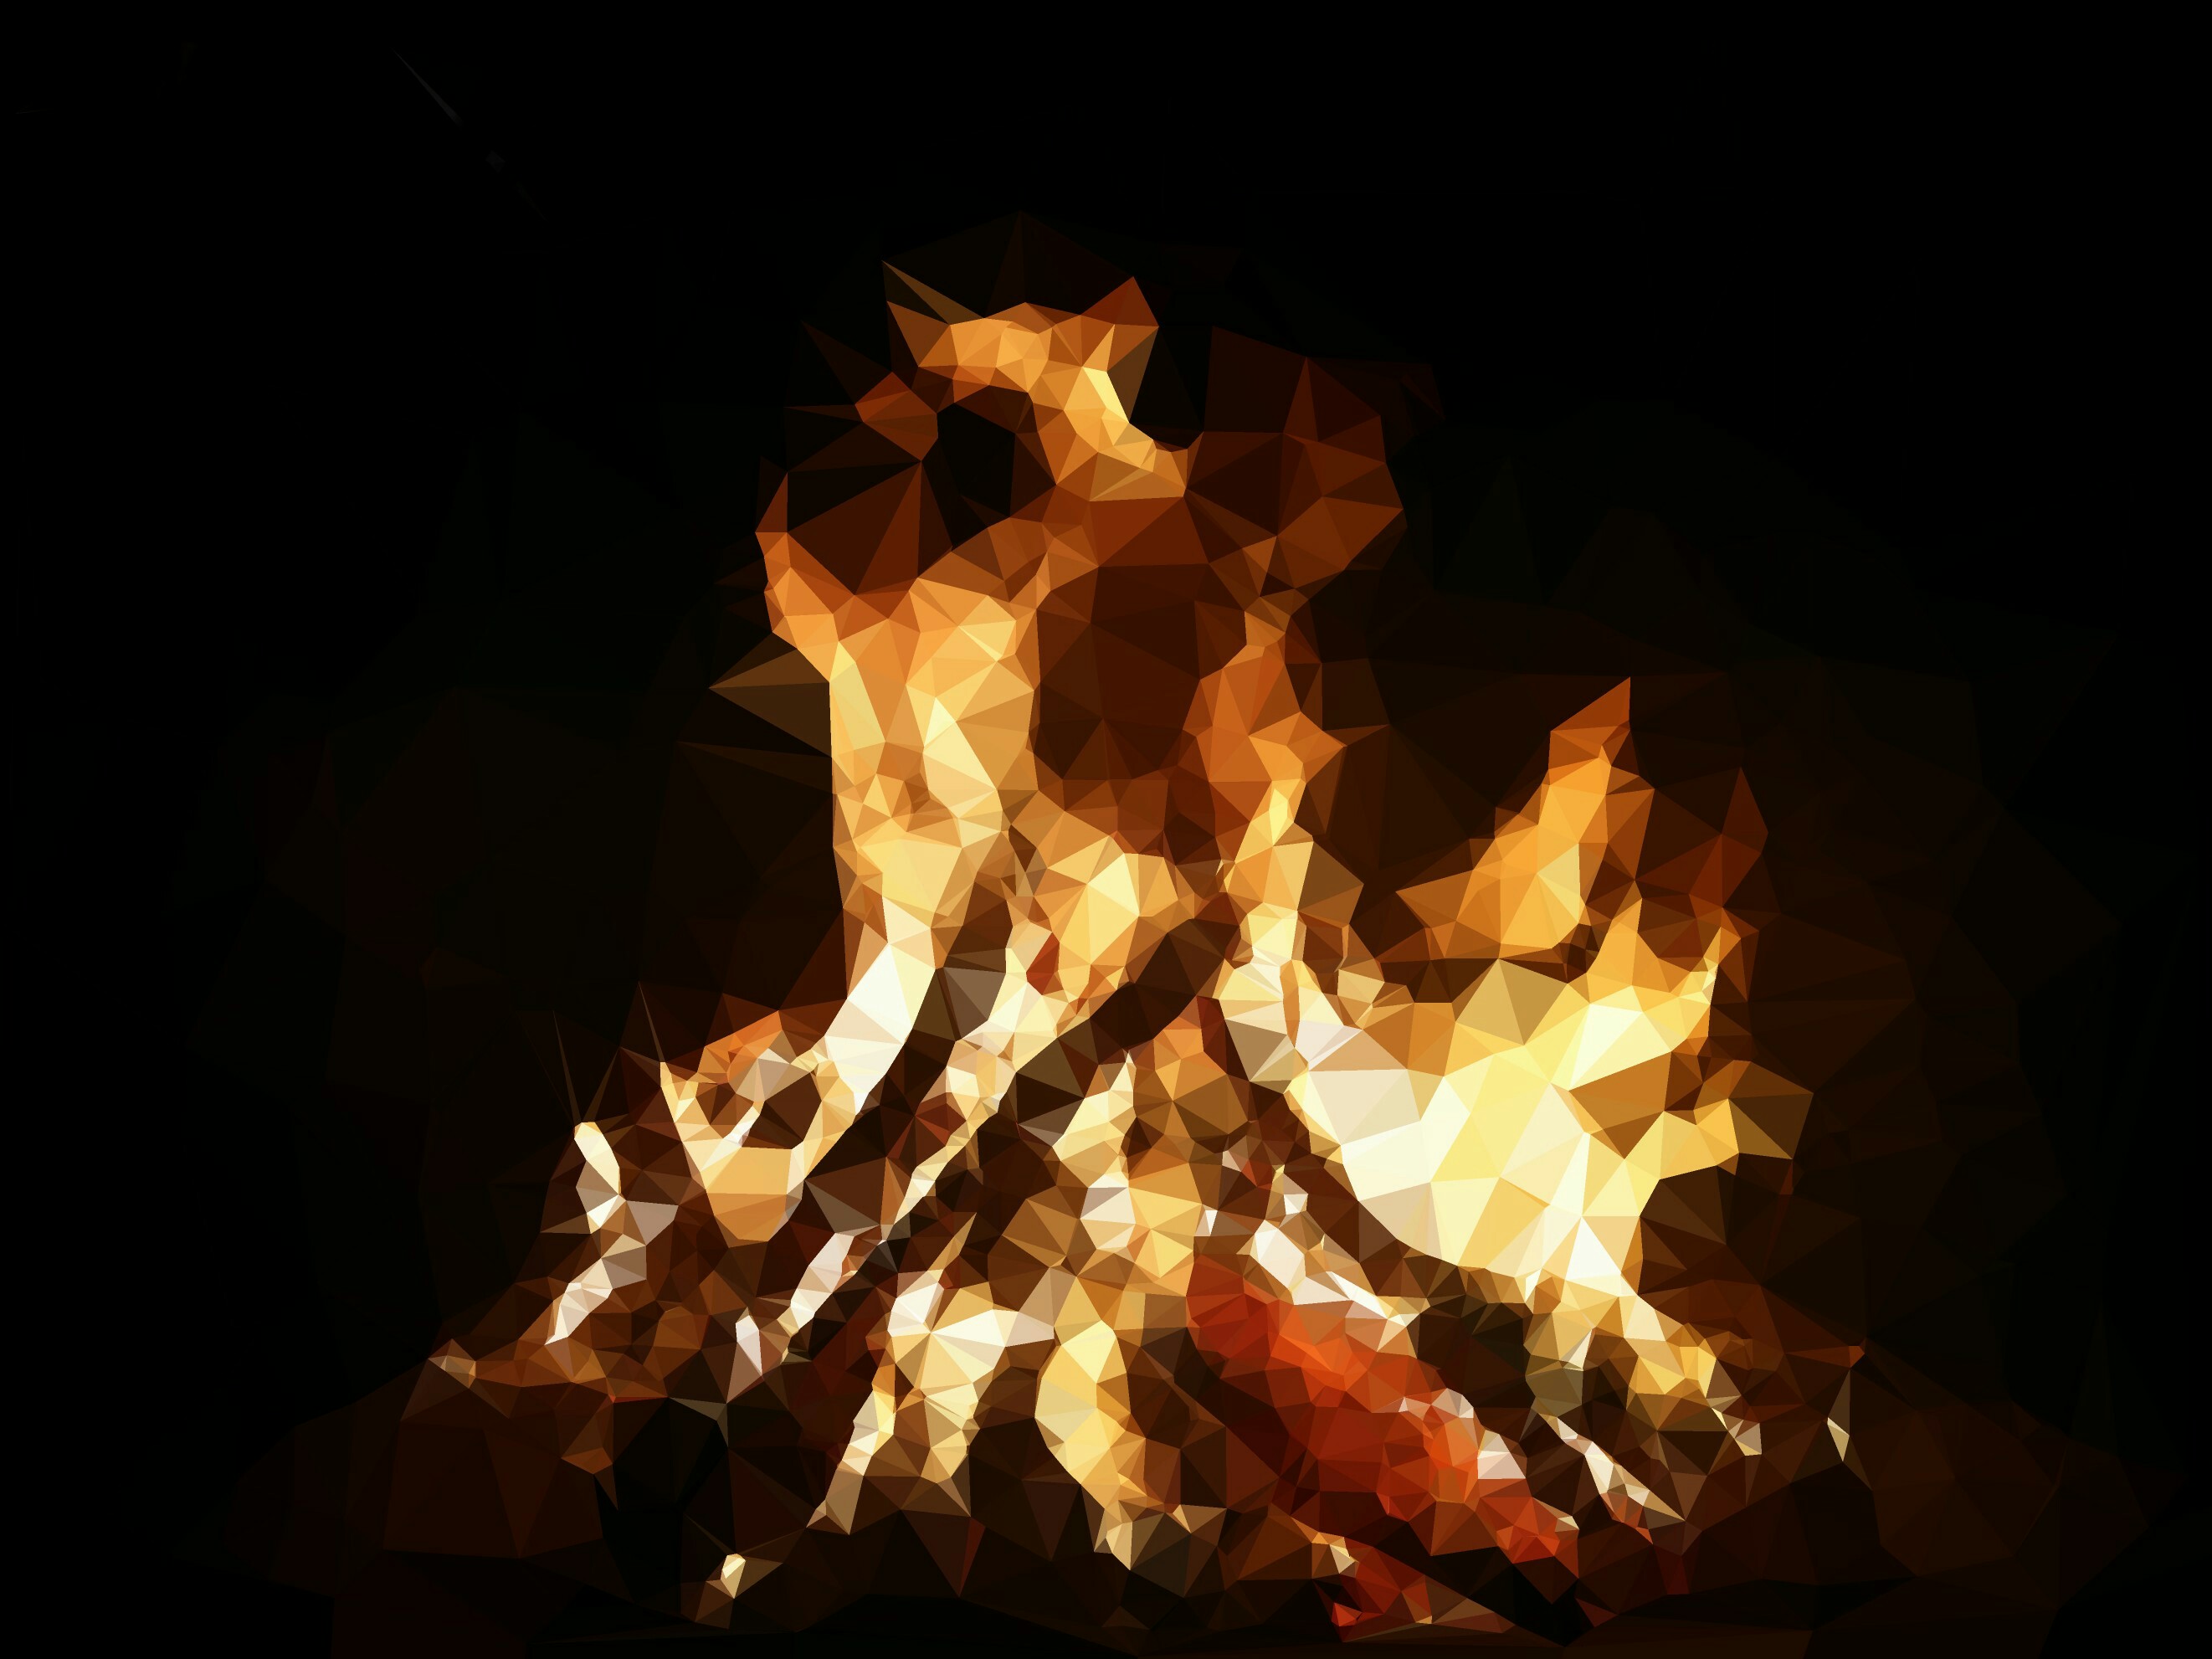 1920x1080 Background artistic, fire, low poly, orange (color), polygon